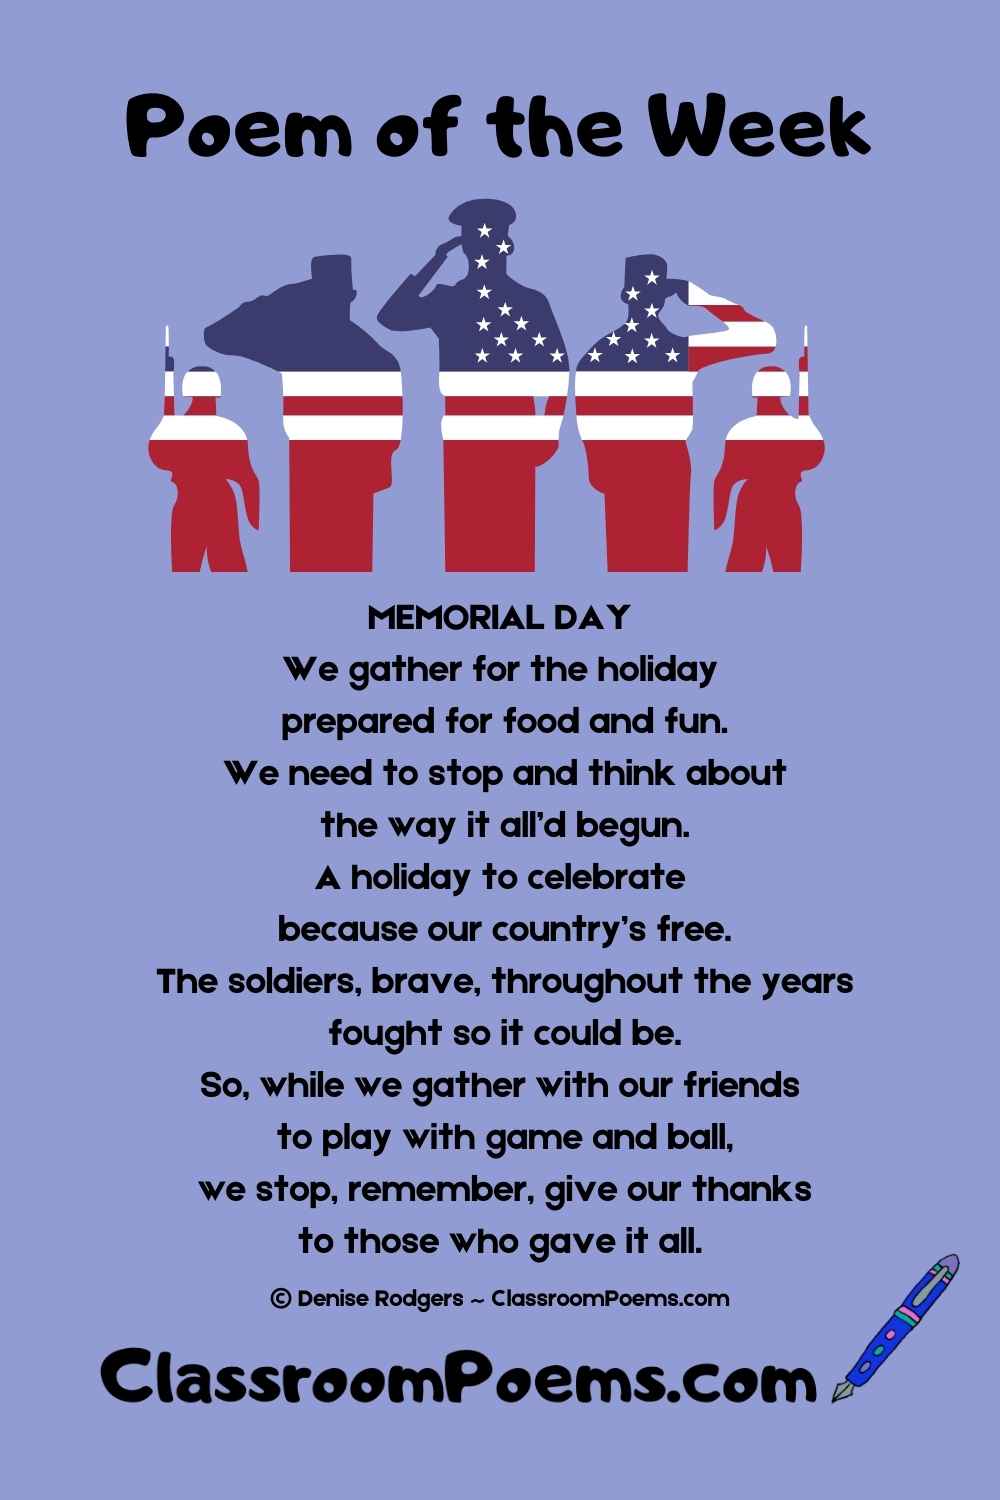 Memorial Day Poem by Denise Rodgers on ClassroomPoems.com.